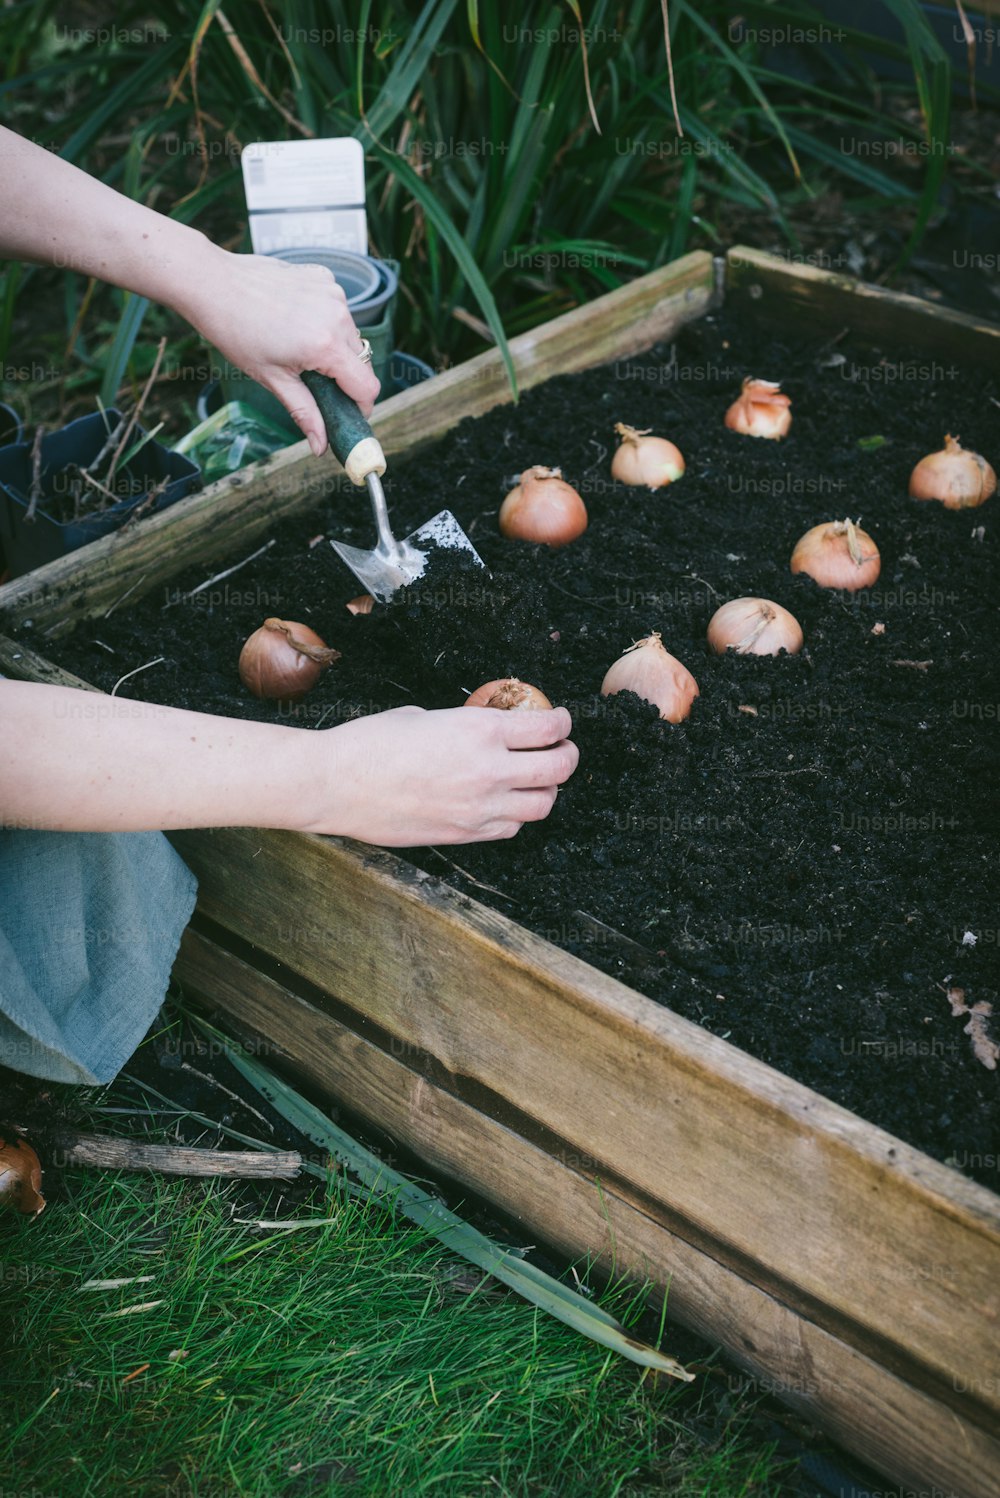 a person is digging in the soil with a garden tool